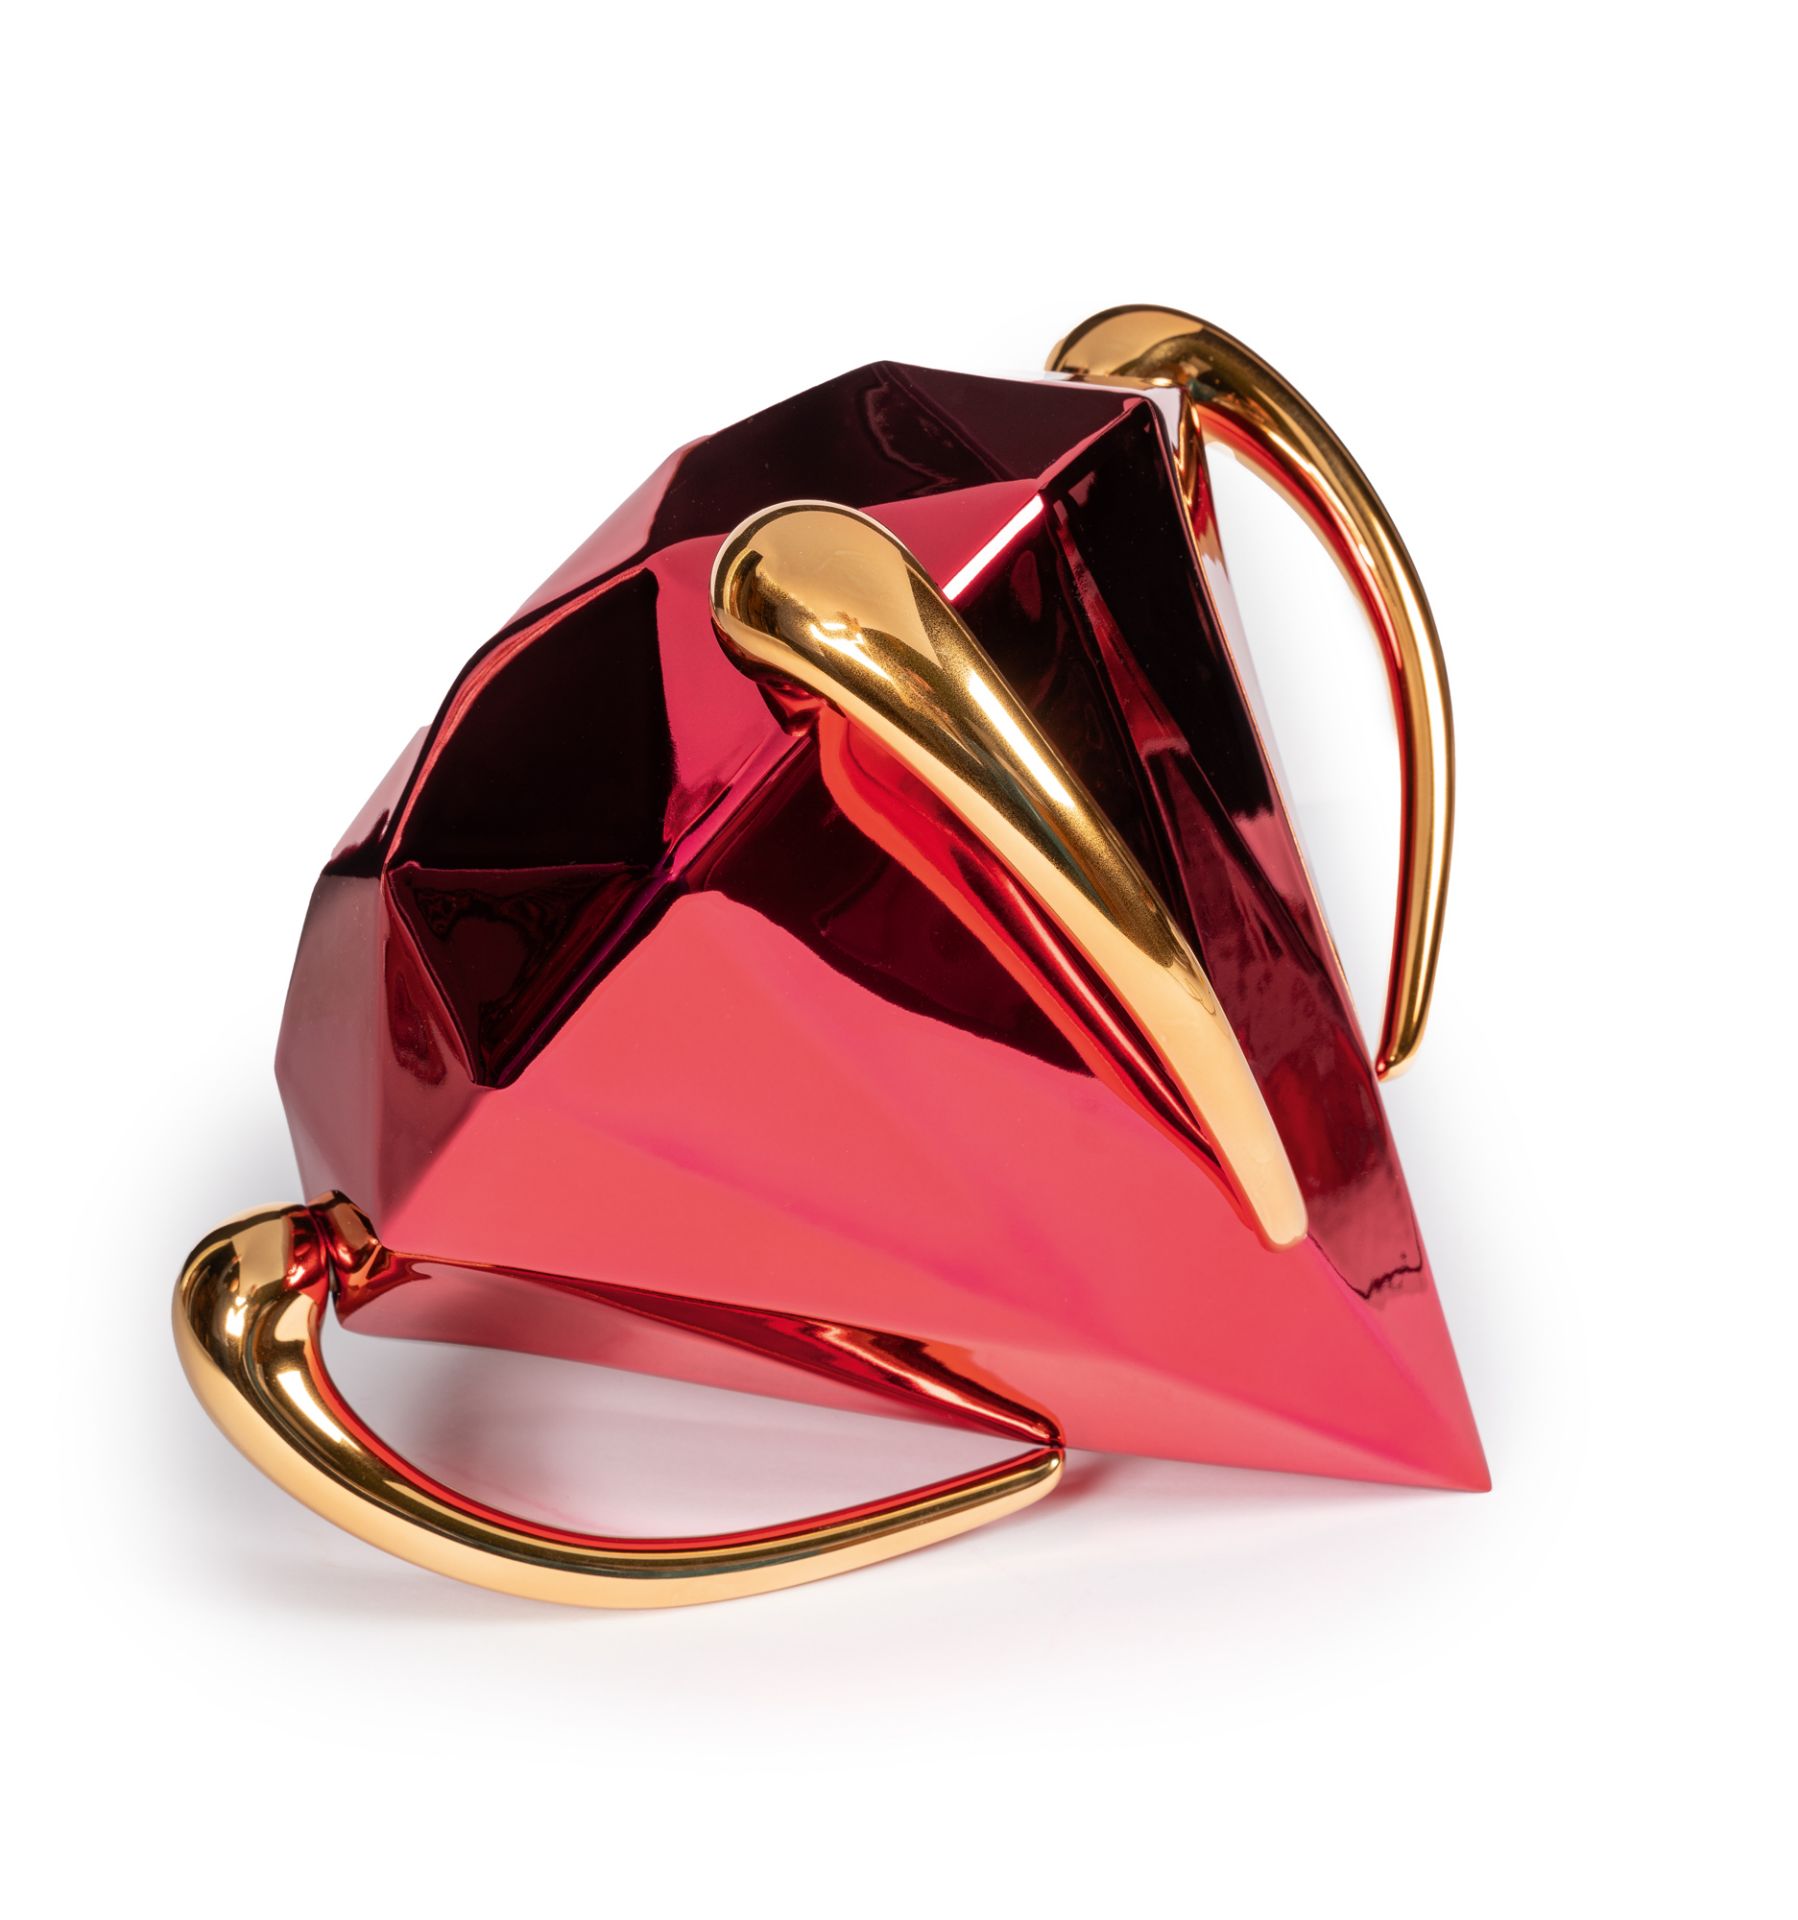 Jeff Koons, Diamond (red).Porcelain with chromatic coating. (2020). Ca. 32.5 x 39 x 32 cm. A - Image 5 of 6